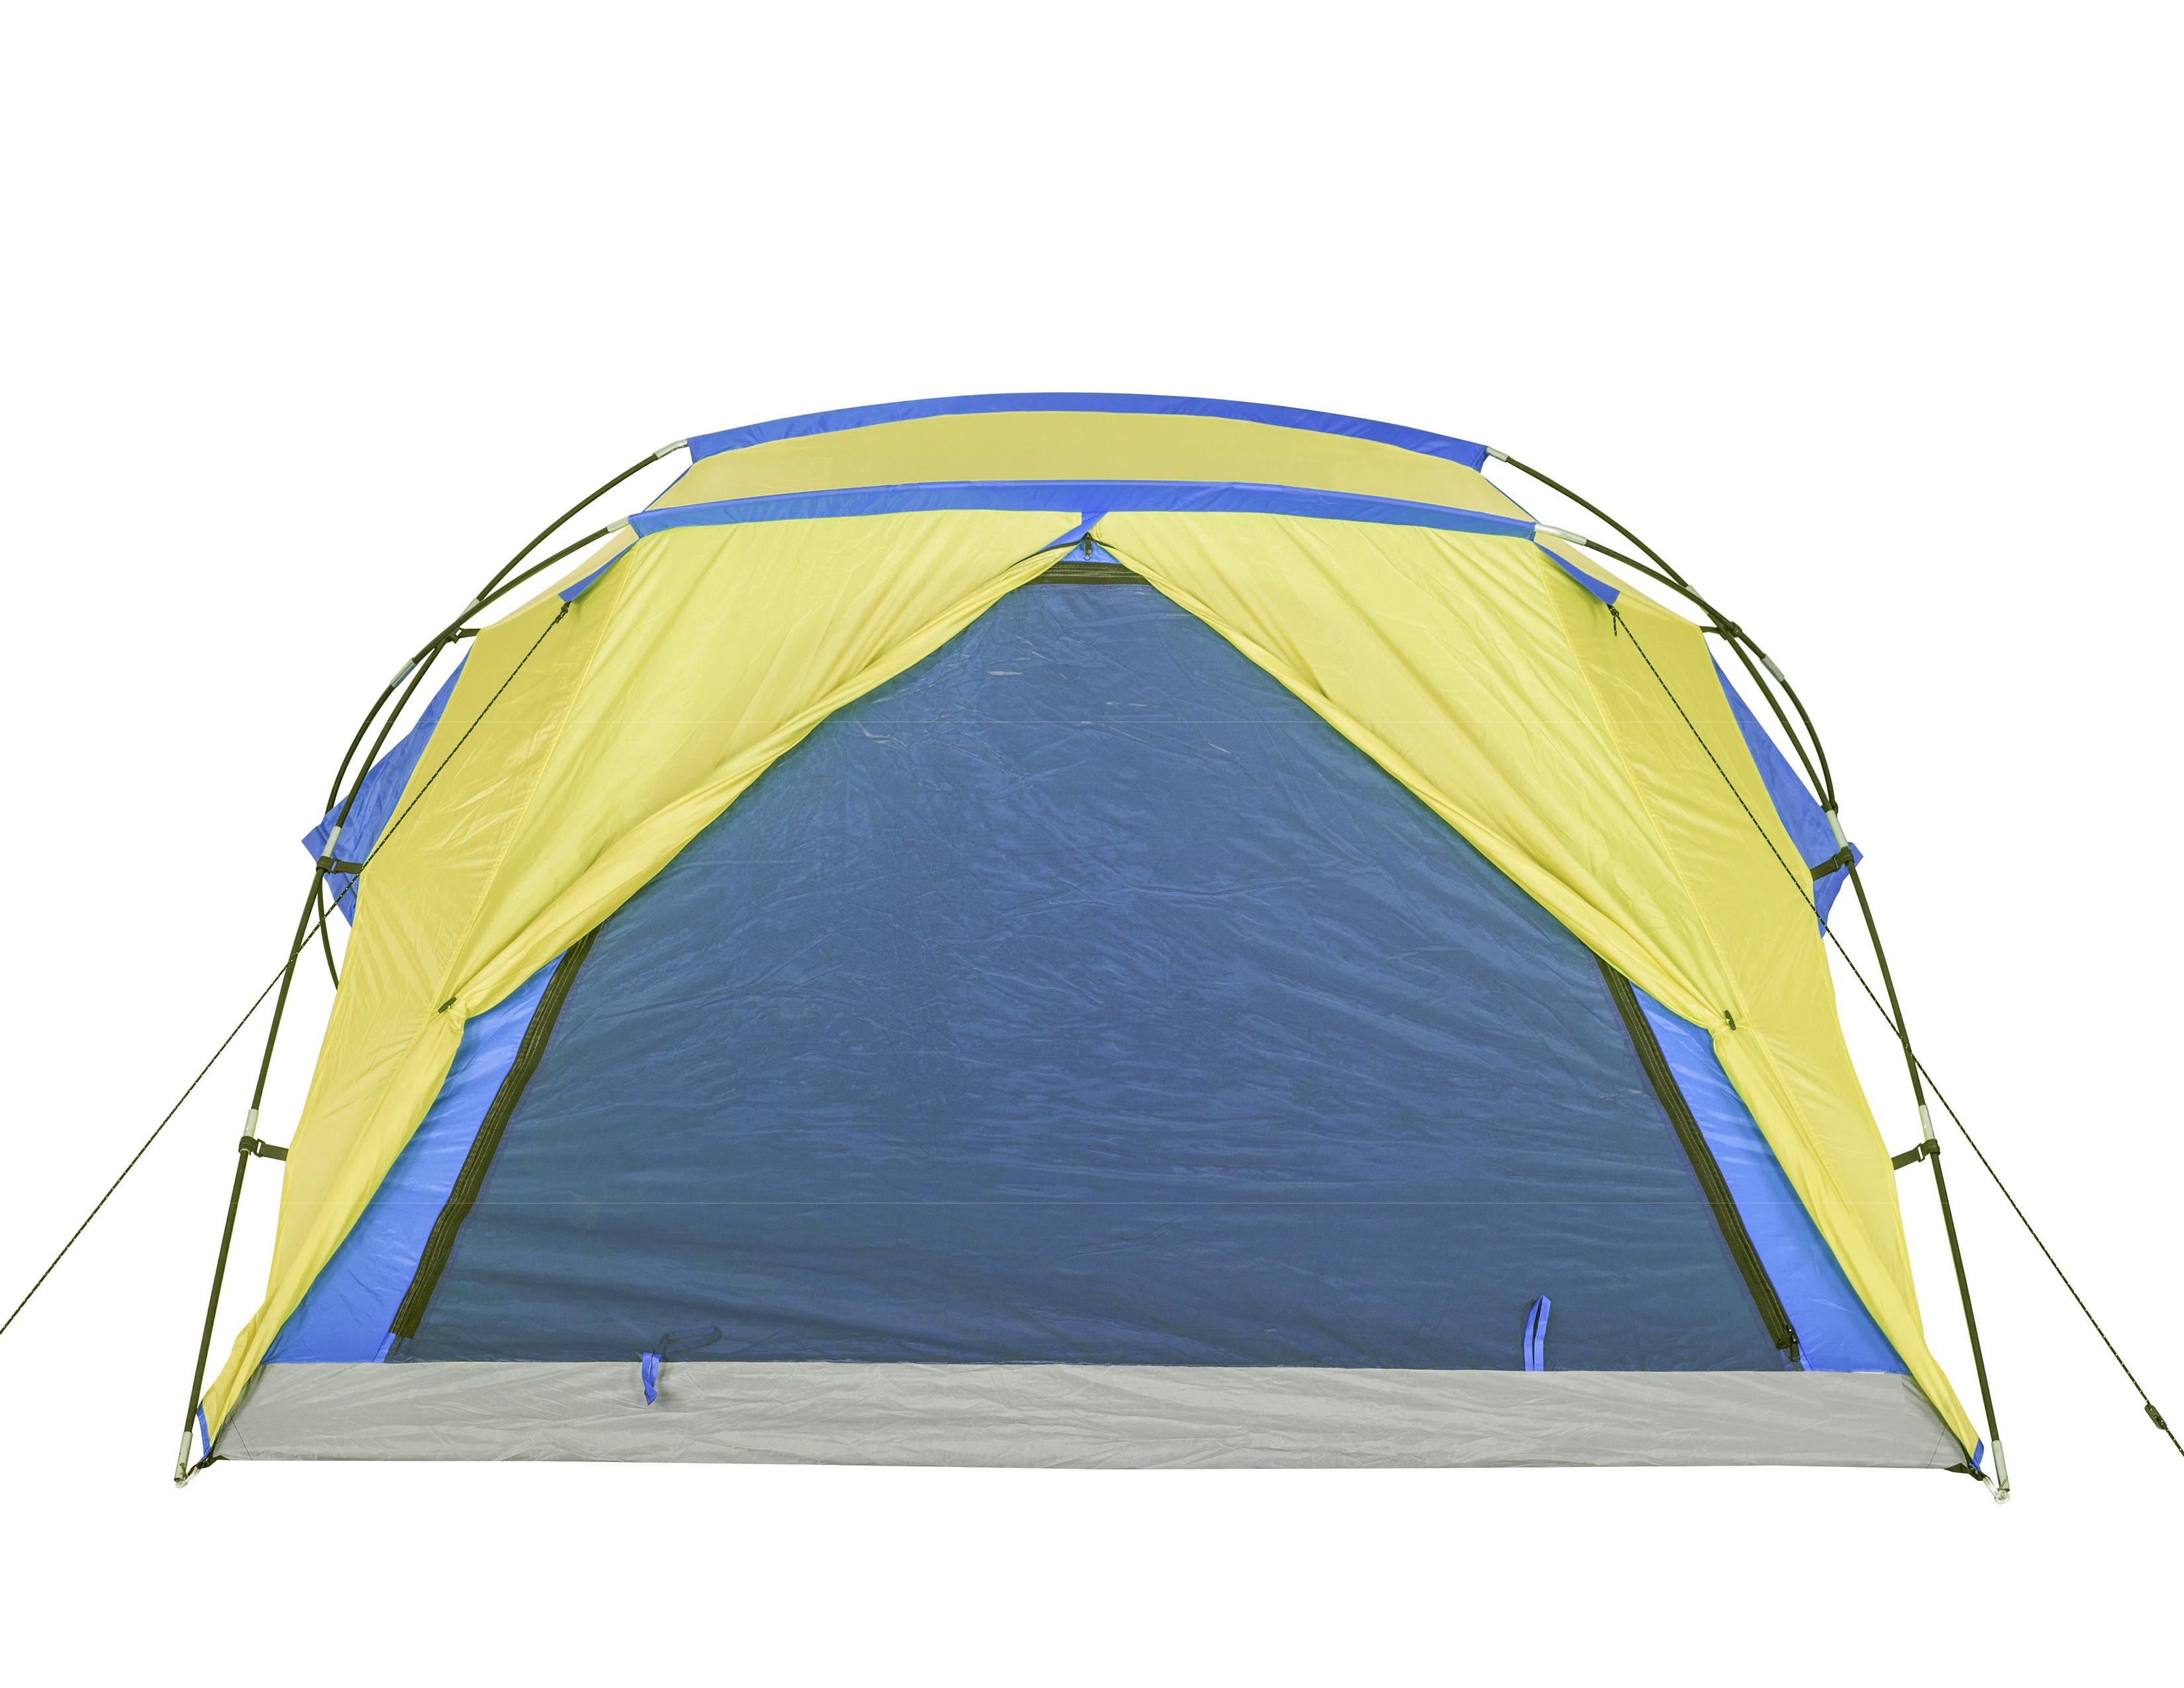 Ozark Trail 3-Person Backpacking Tent - image 3 of 12